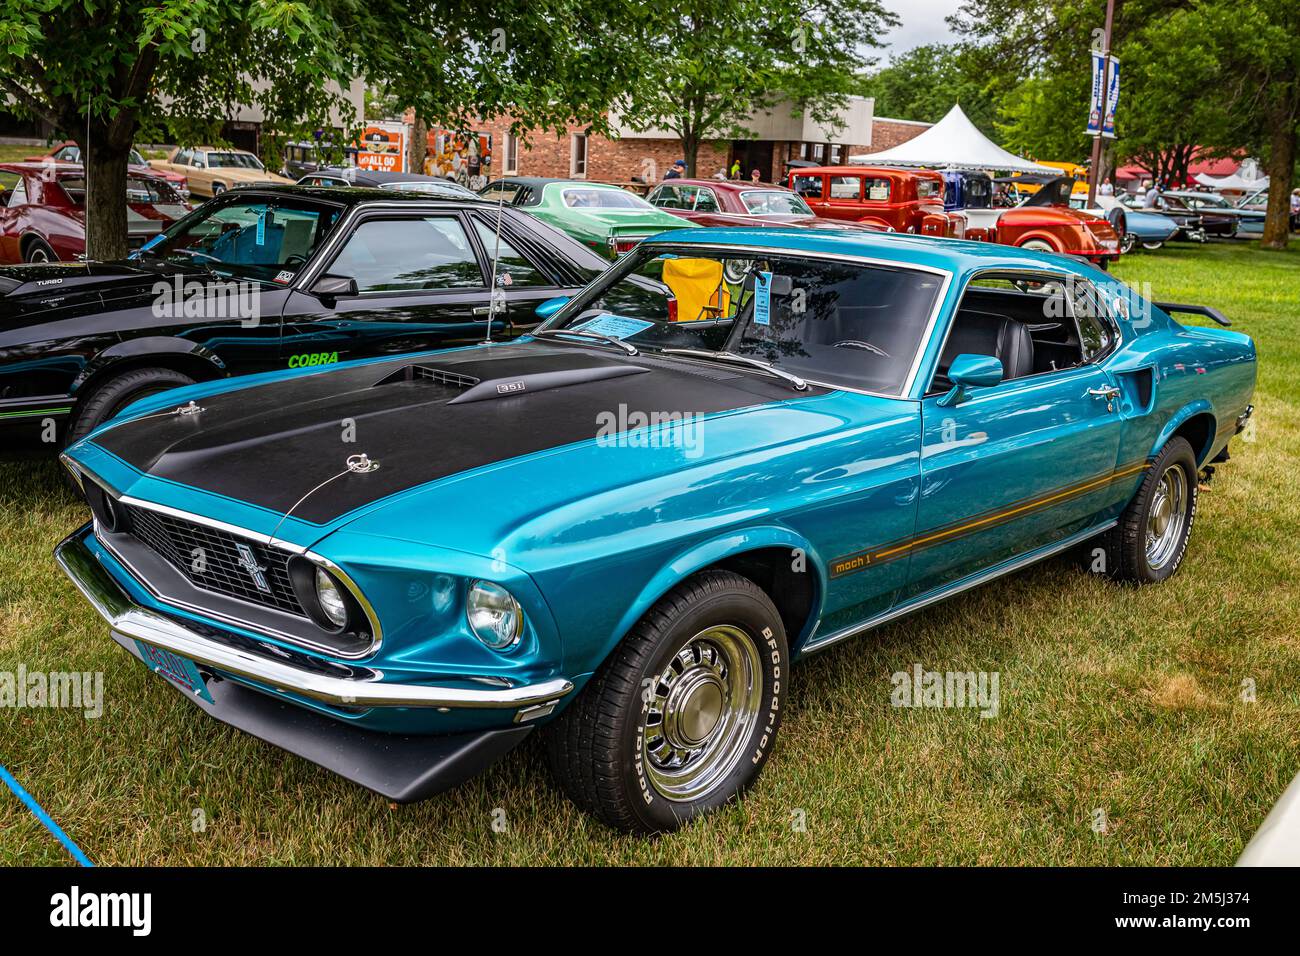 Iola, WI - July 07, 2022: High perspective front corner view of a 1969 Ford Mustang Mach 1 Fastback at a local car show. Stock Photo